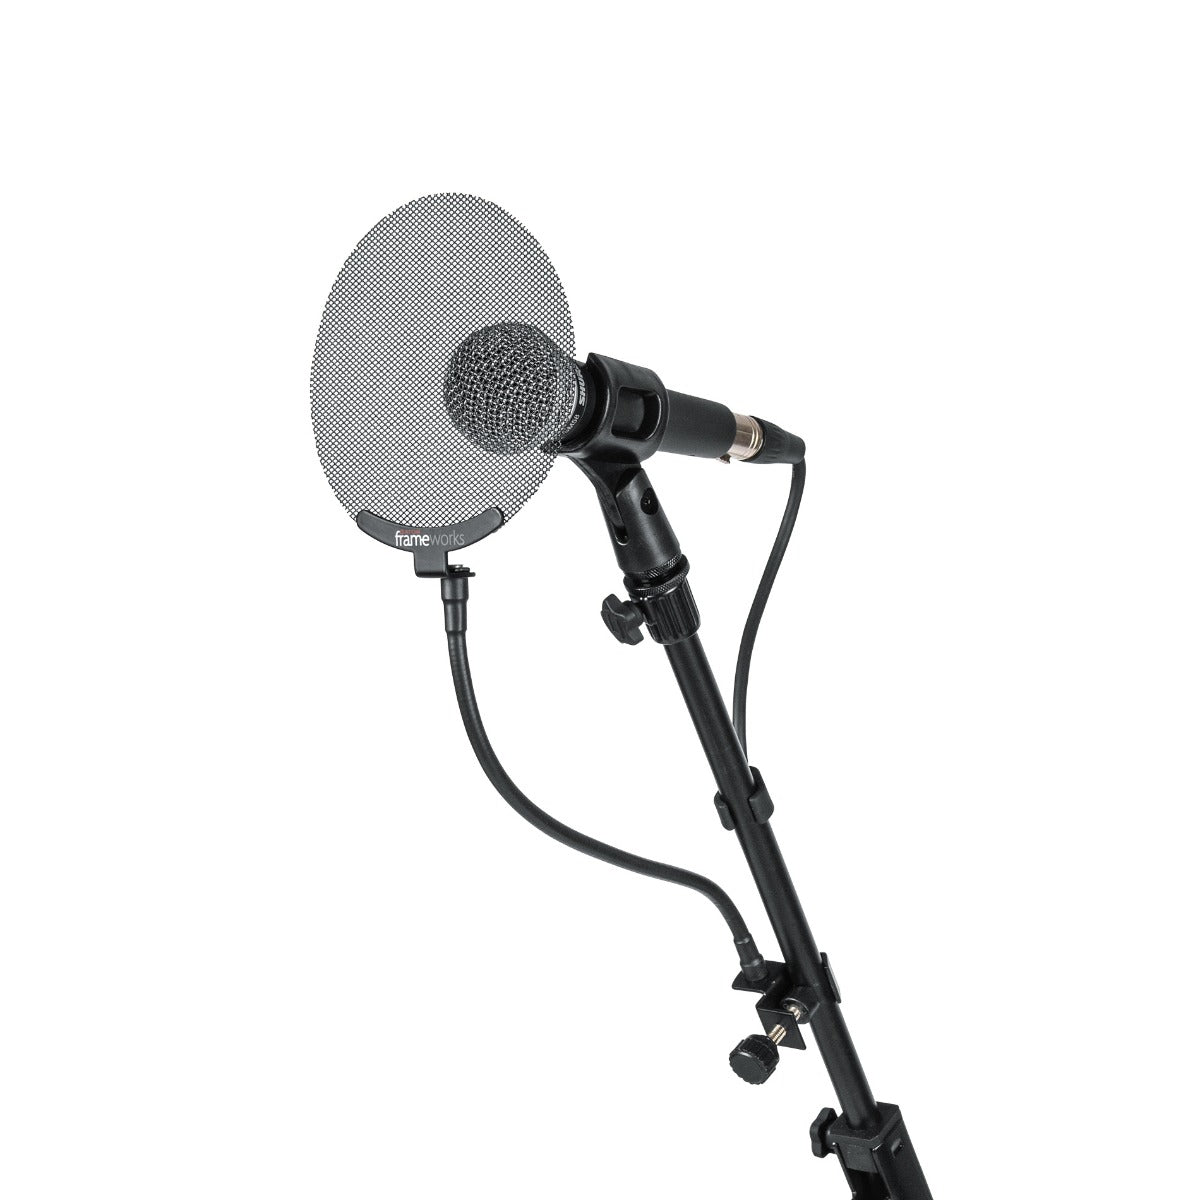 Filter attached to a microphone stand